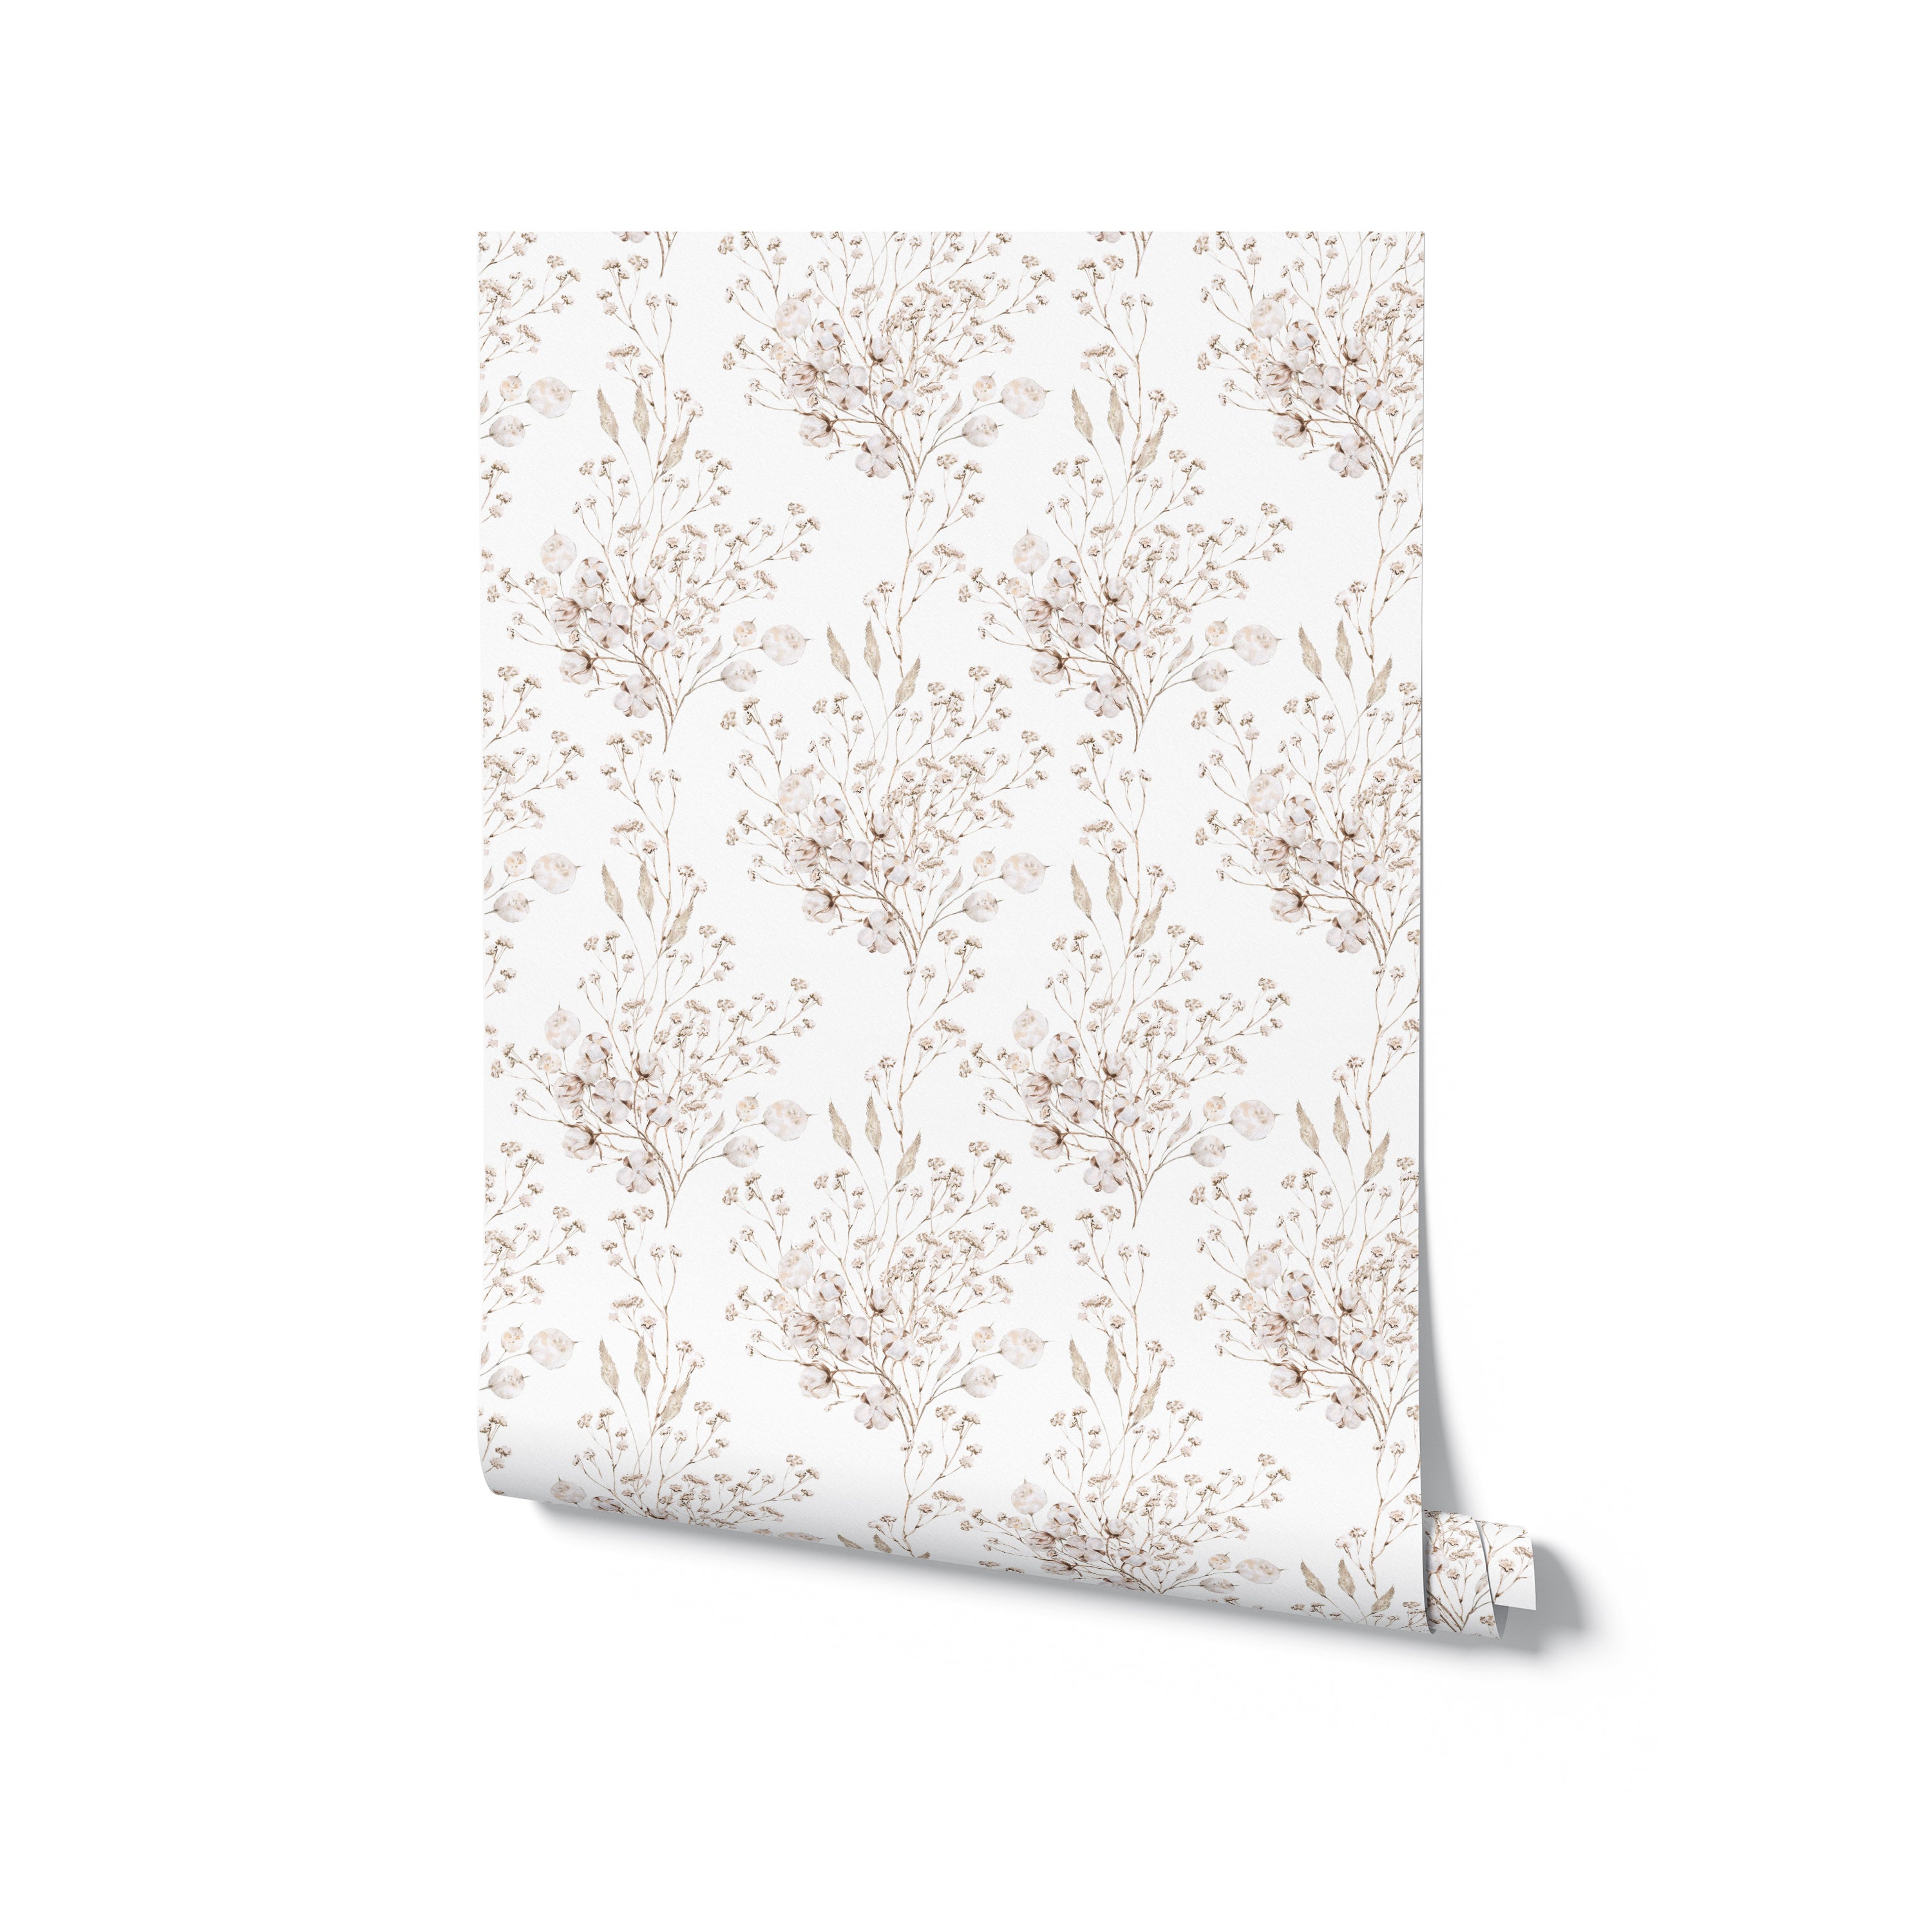 A rolled-up sample of the Boho Winter Floral Wallpaper - 12.5", showcasing the graceful and detailed botanical print. The light taupe floral patterns are set against a pristine white background, perfect for enhancing the decor with a subtle, elegant touch.